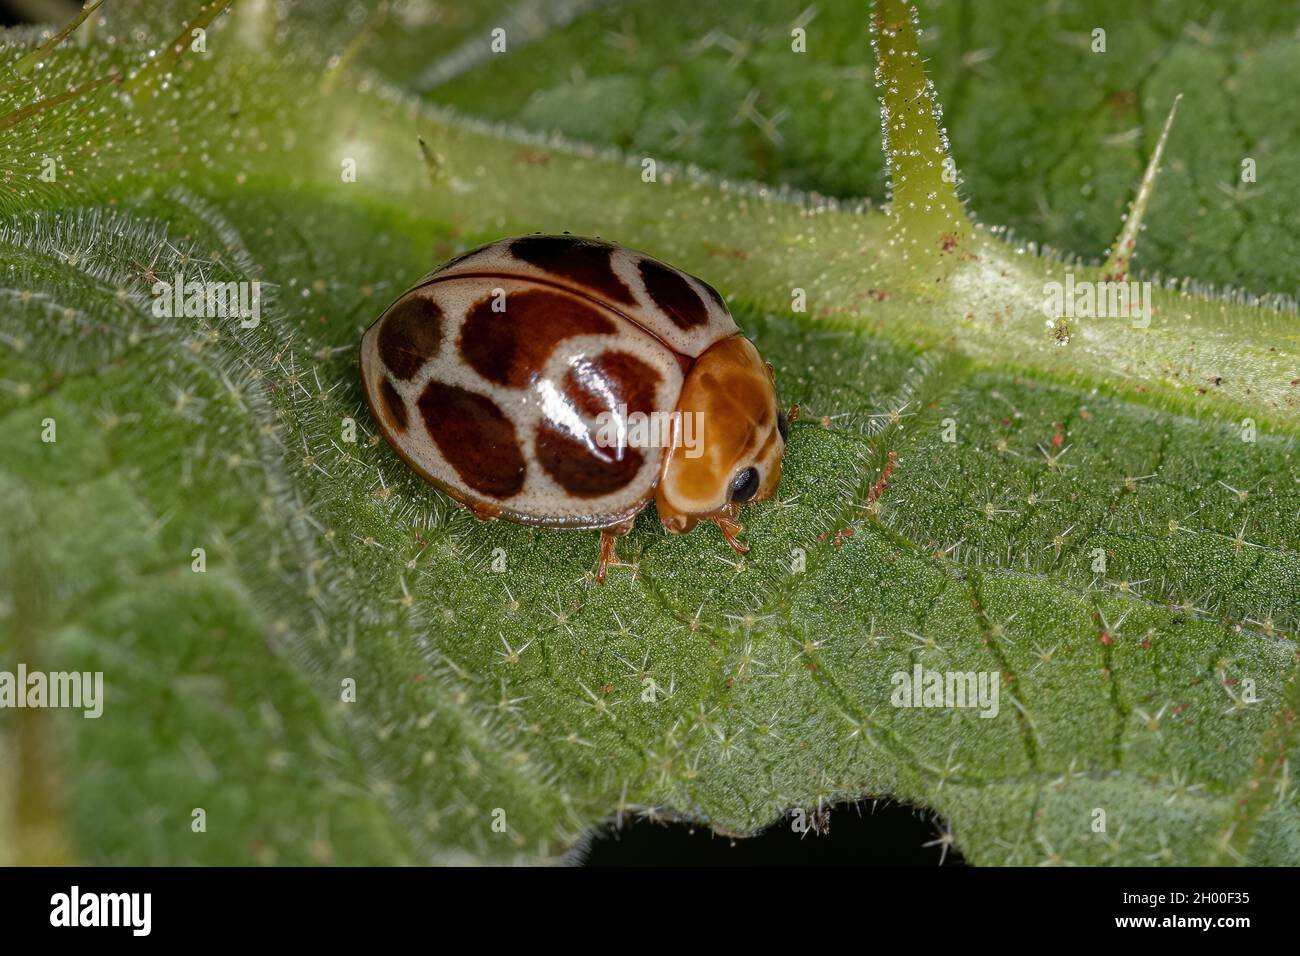 Adult Common Lady Beetle of the species Cycloneda conjugata Stock Photo